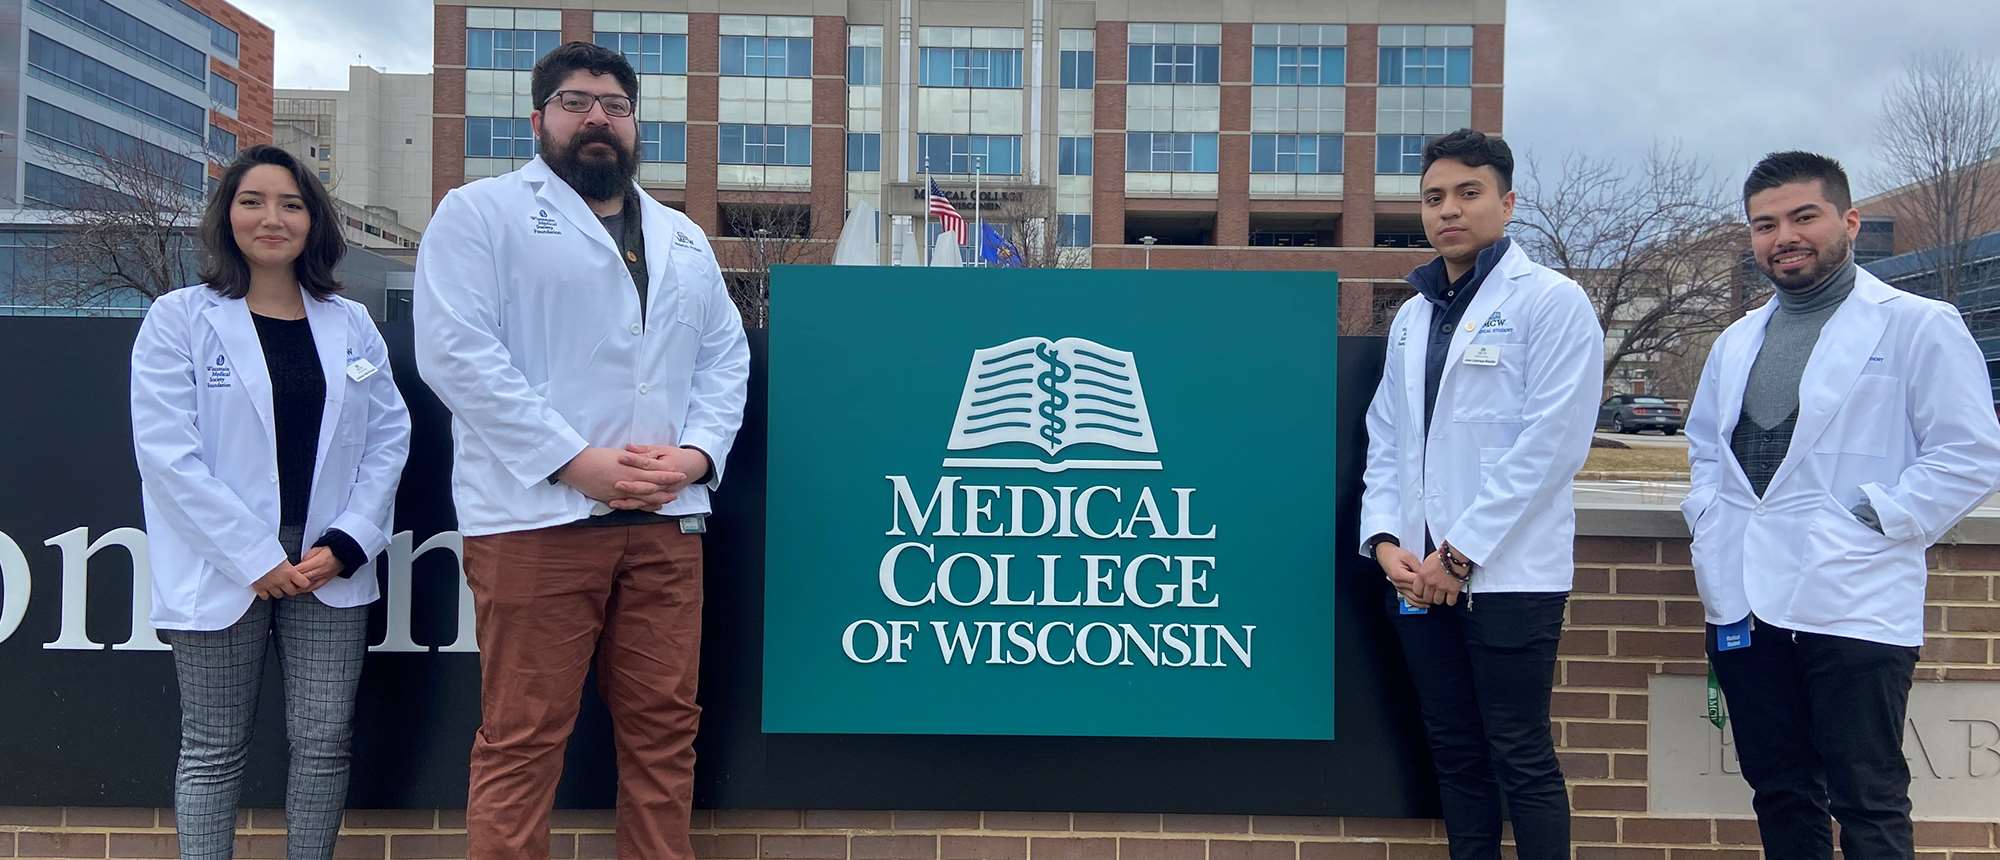 MCW StEP-UP Program | Helping local students on their journey to medical school